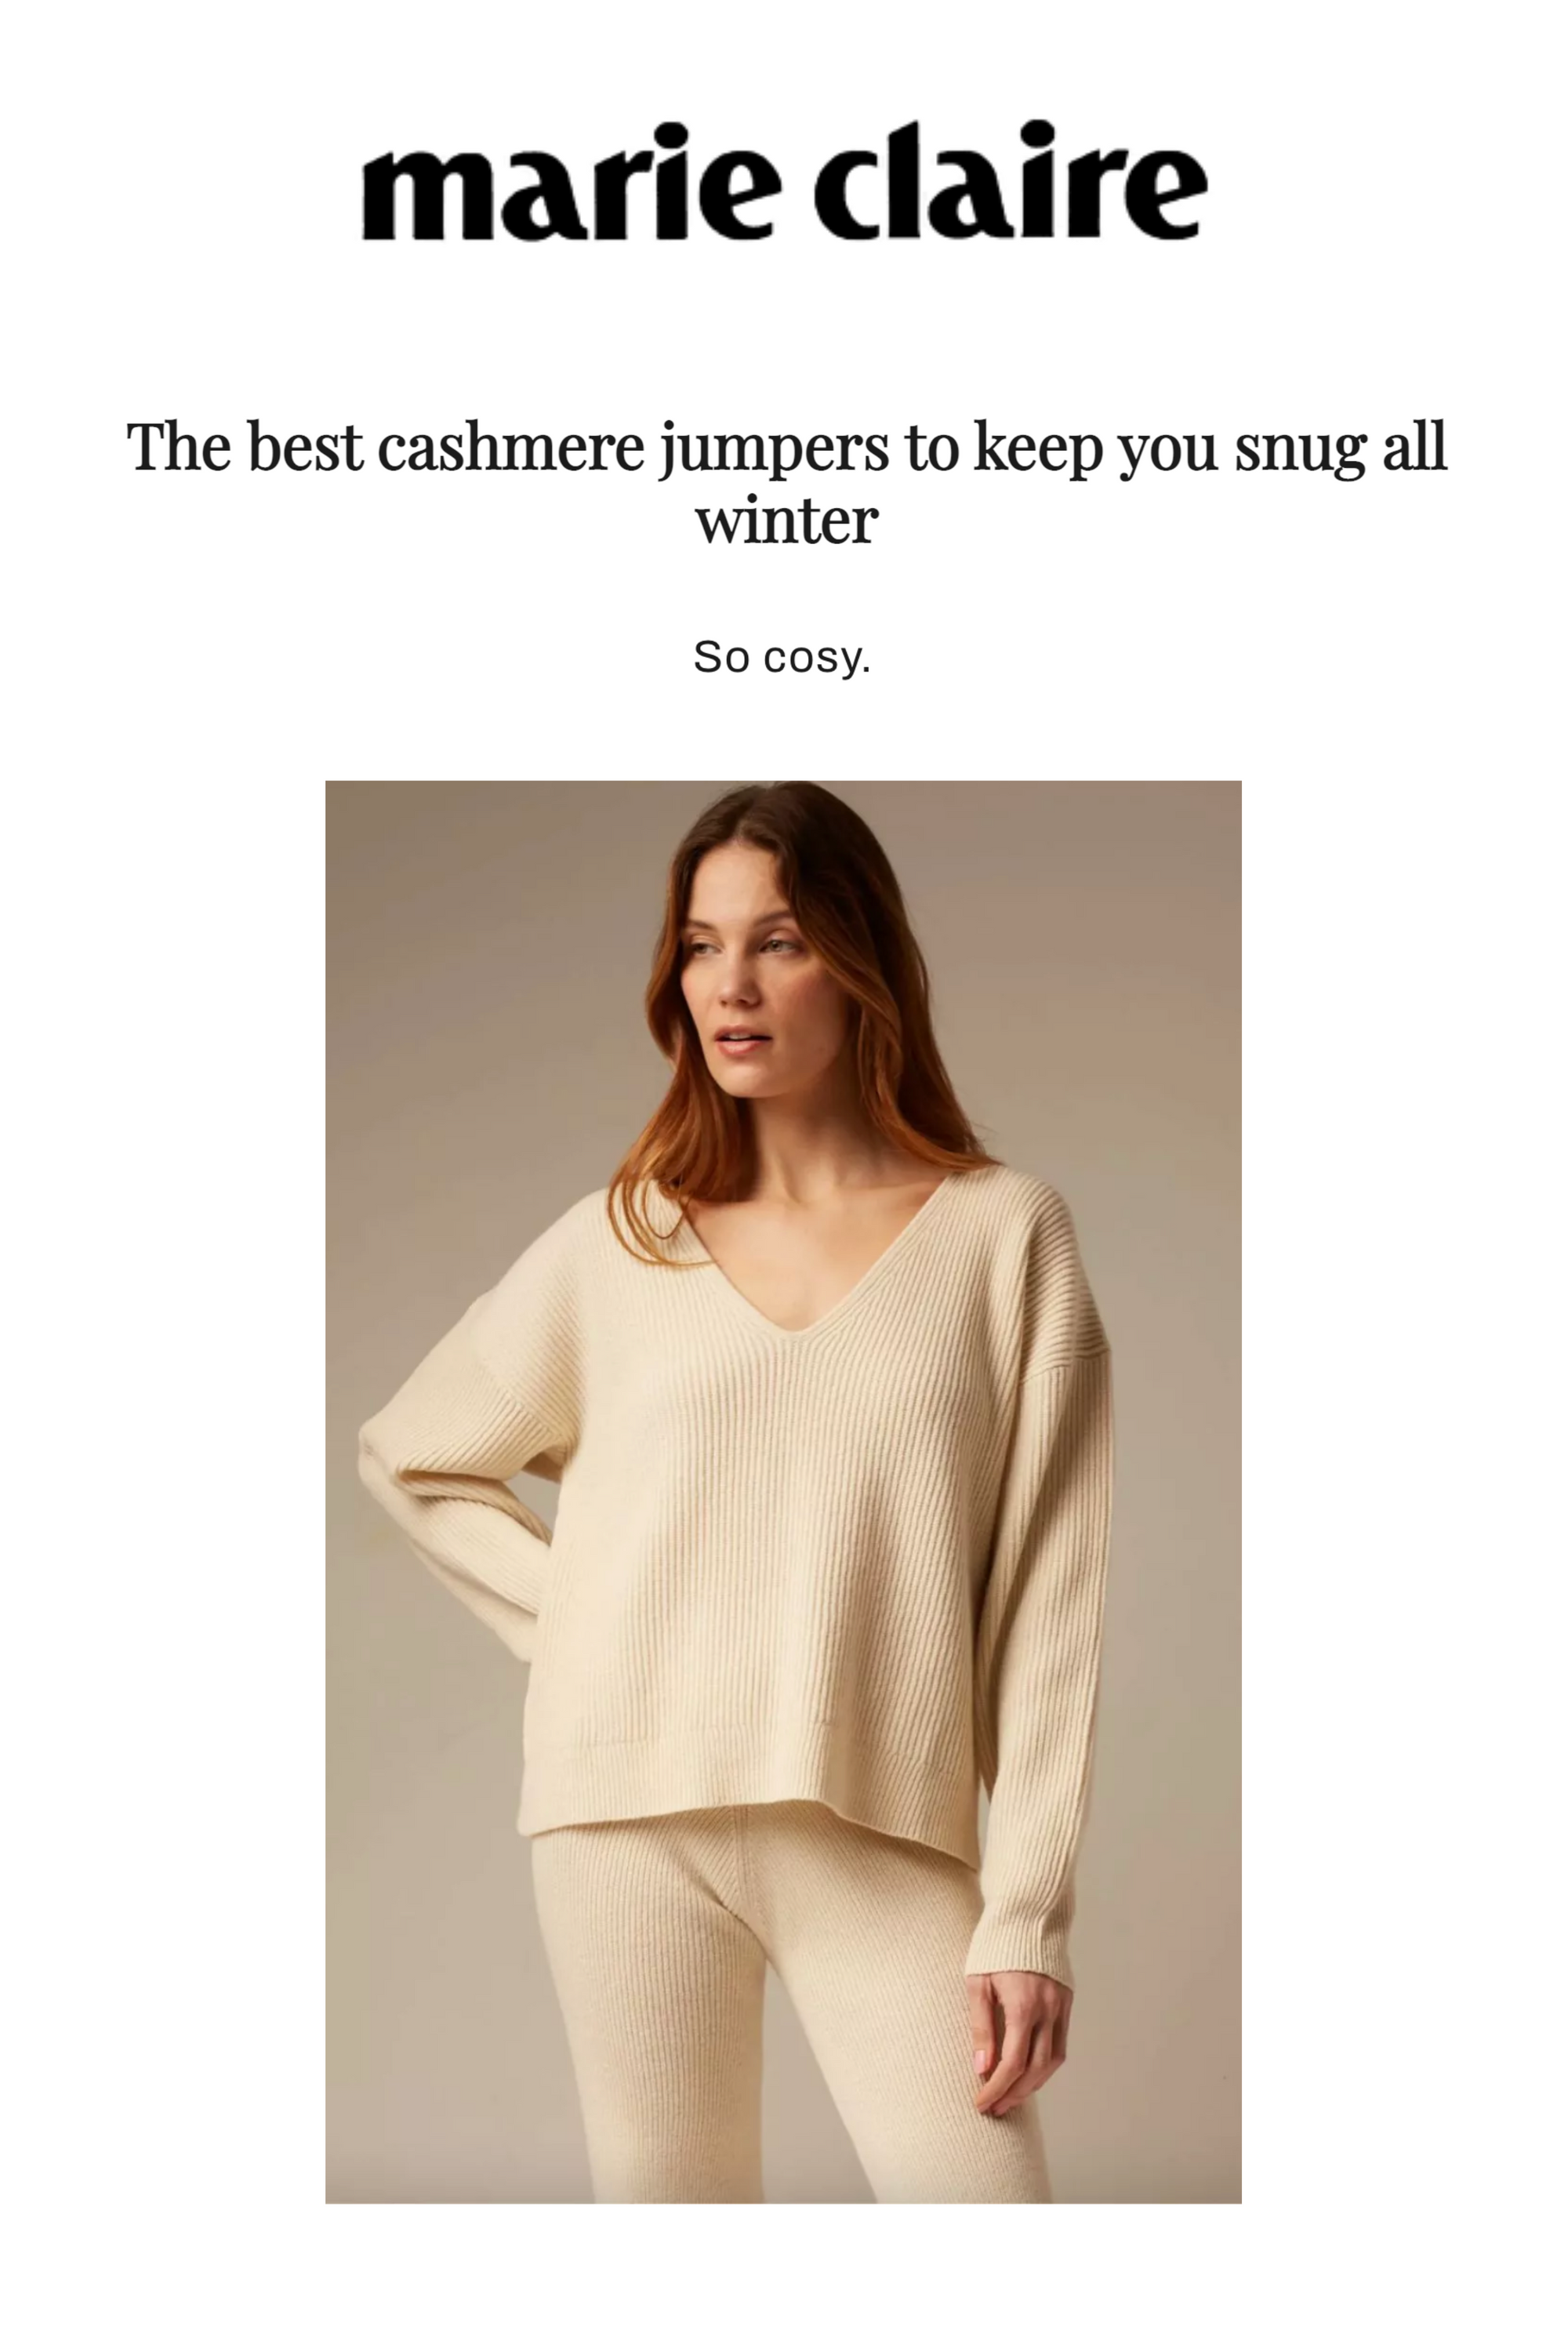 MARIE CLAIRE | The best cashmere jumpers to keep you snug all winter